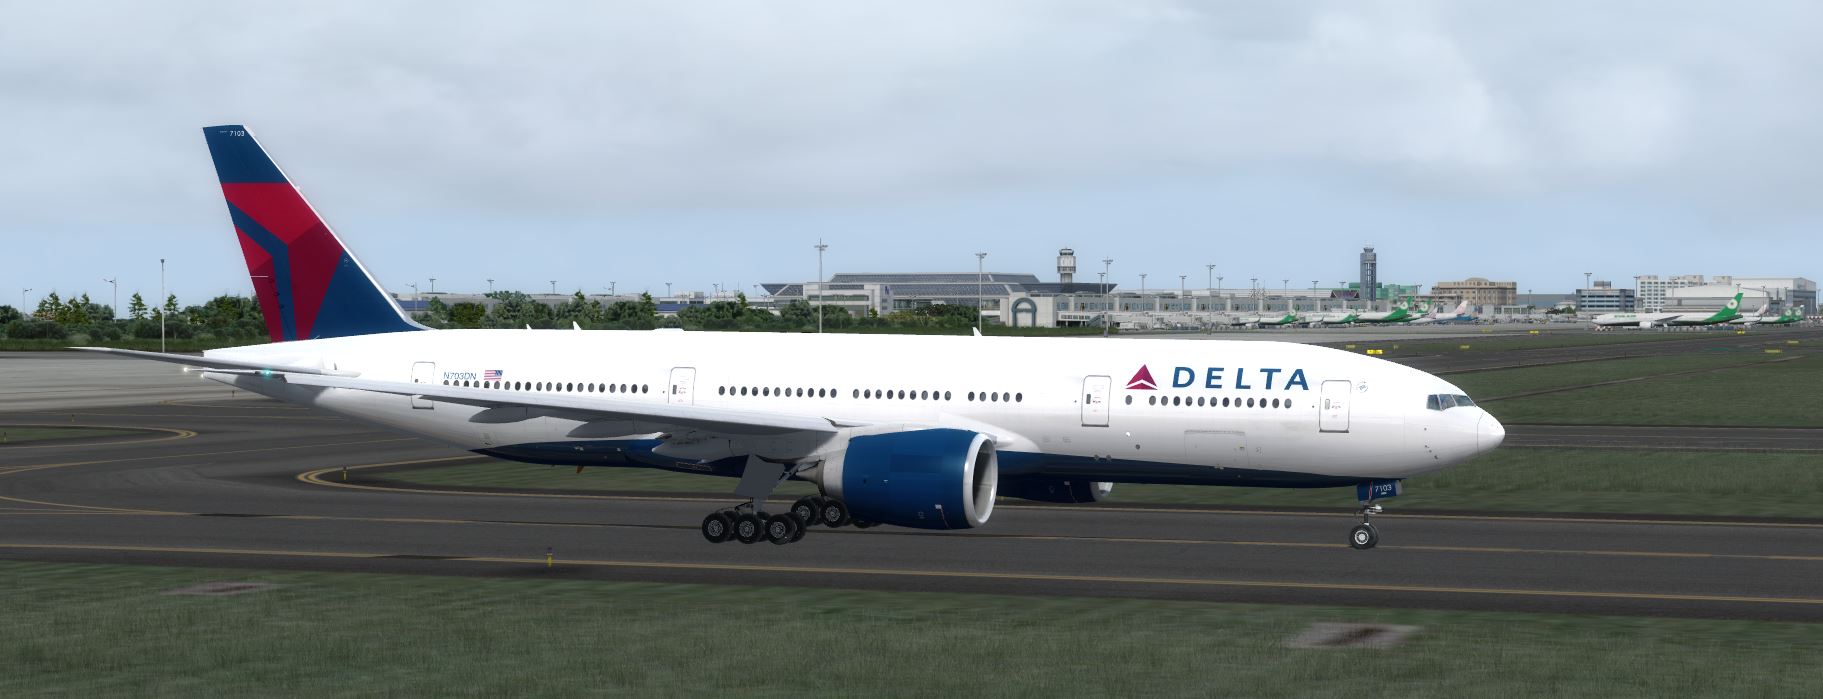 B777-200 Delta Airlines Standard Livery-5767 